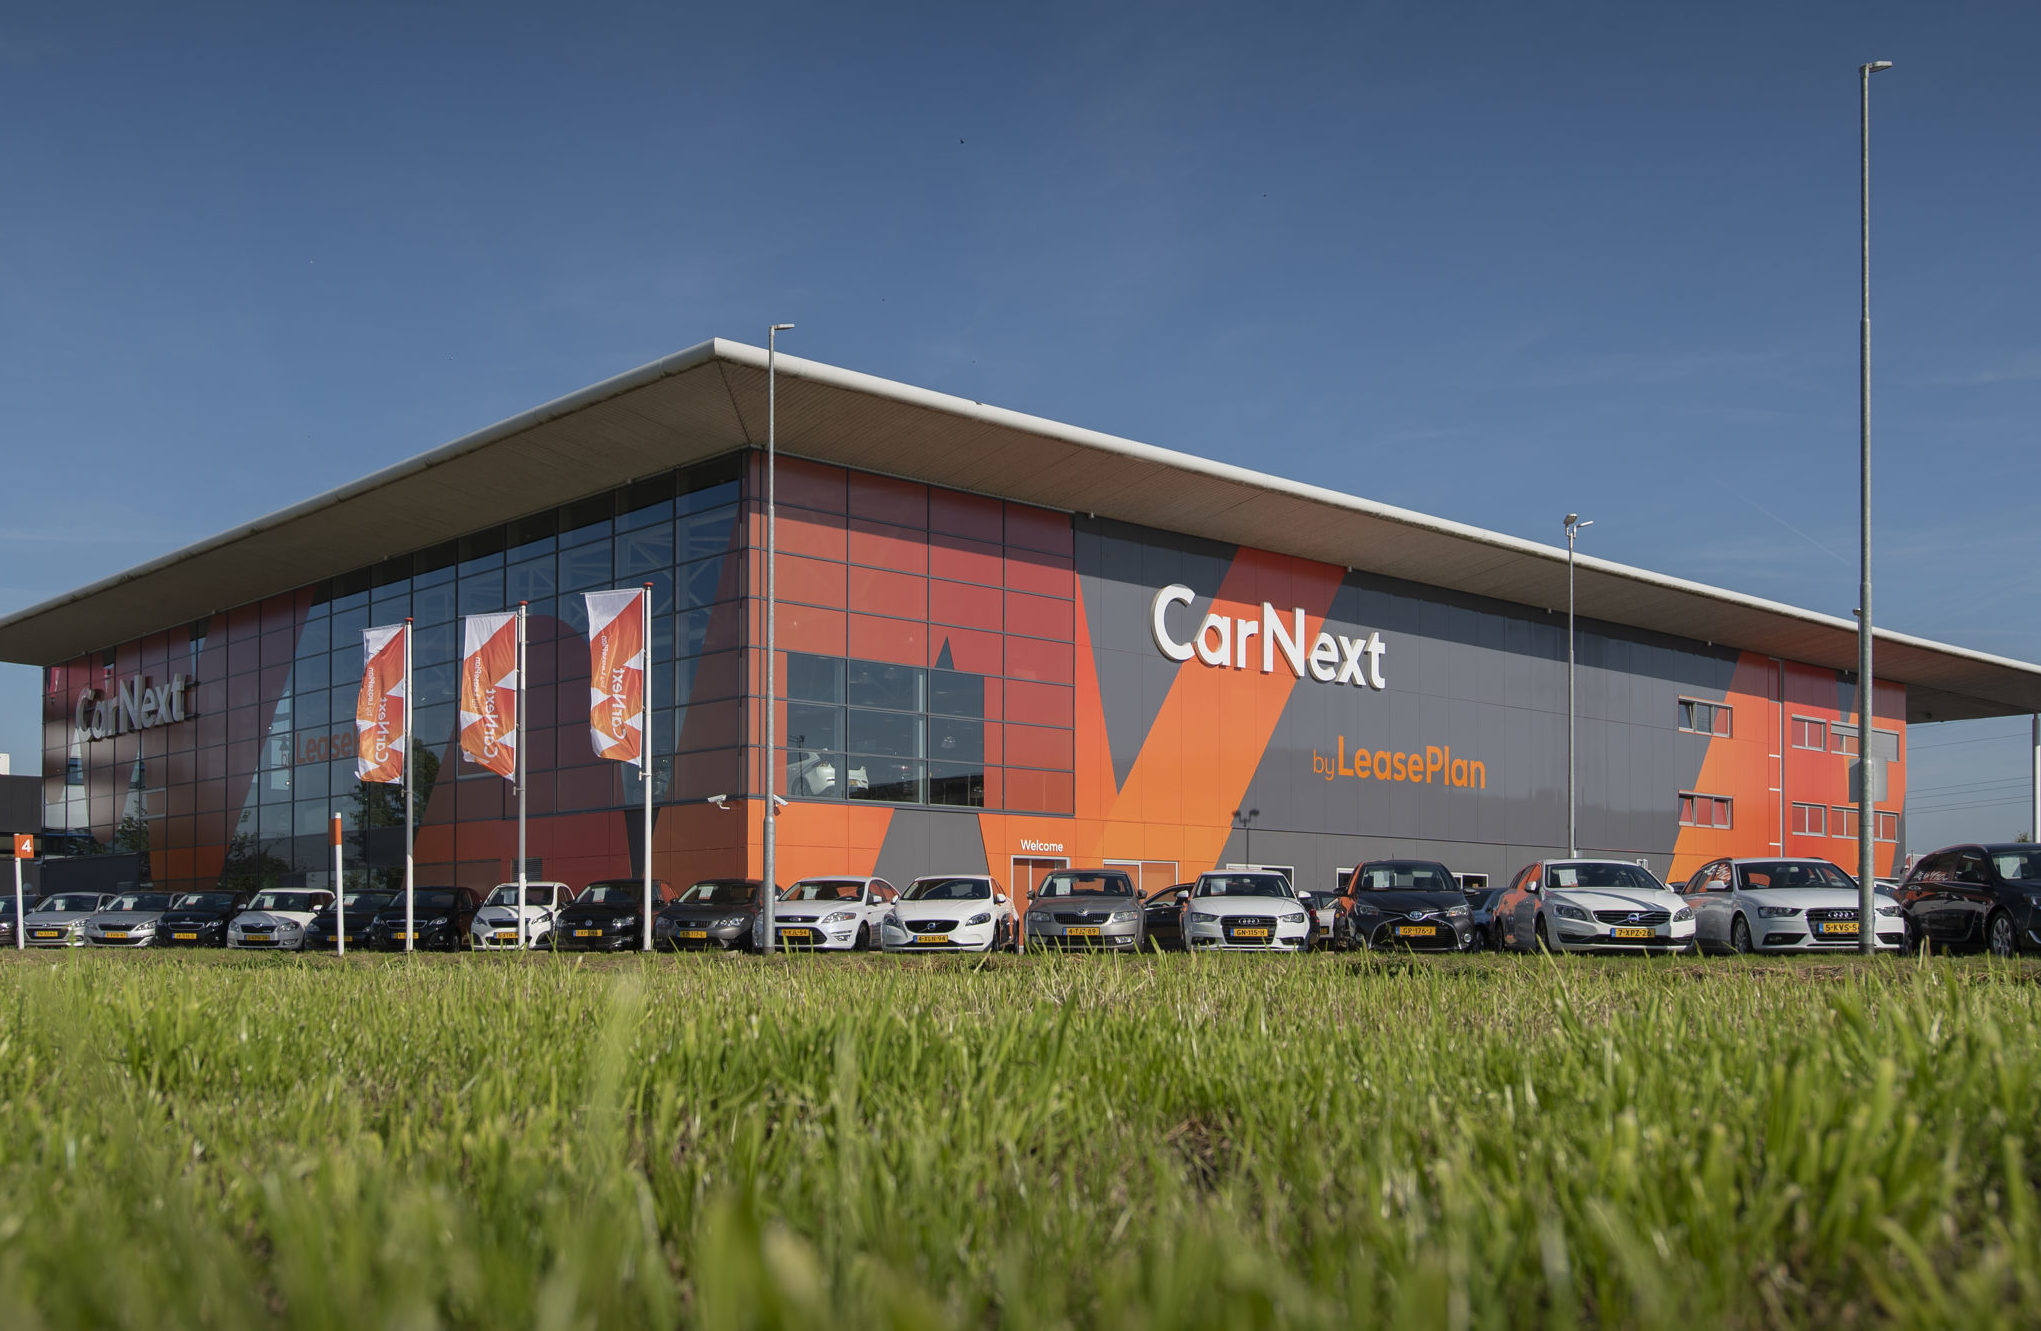 British Constellation acquires CarNext to become EU’s used car leader